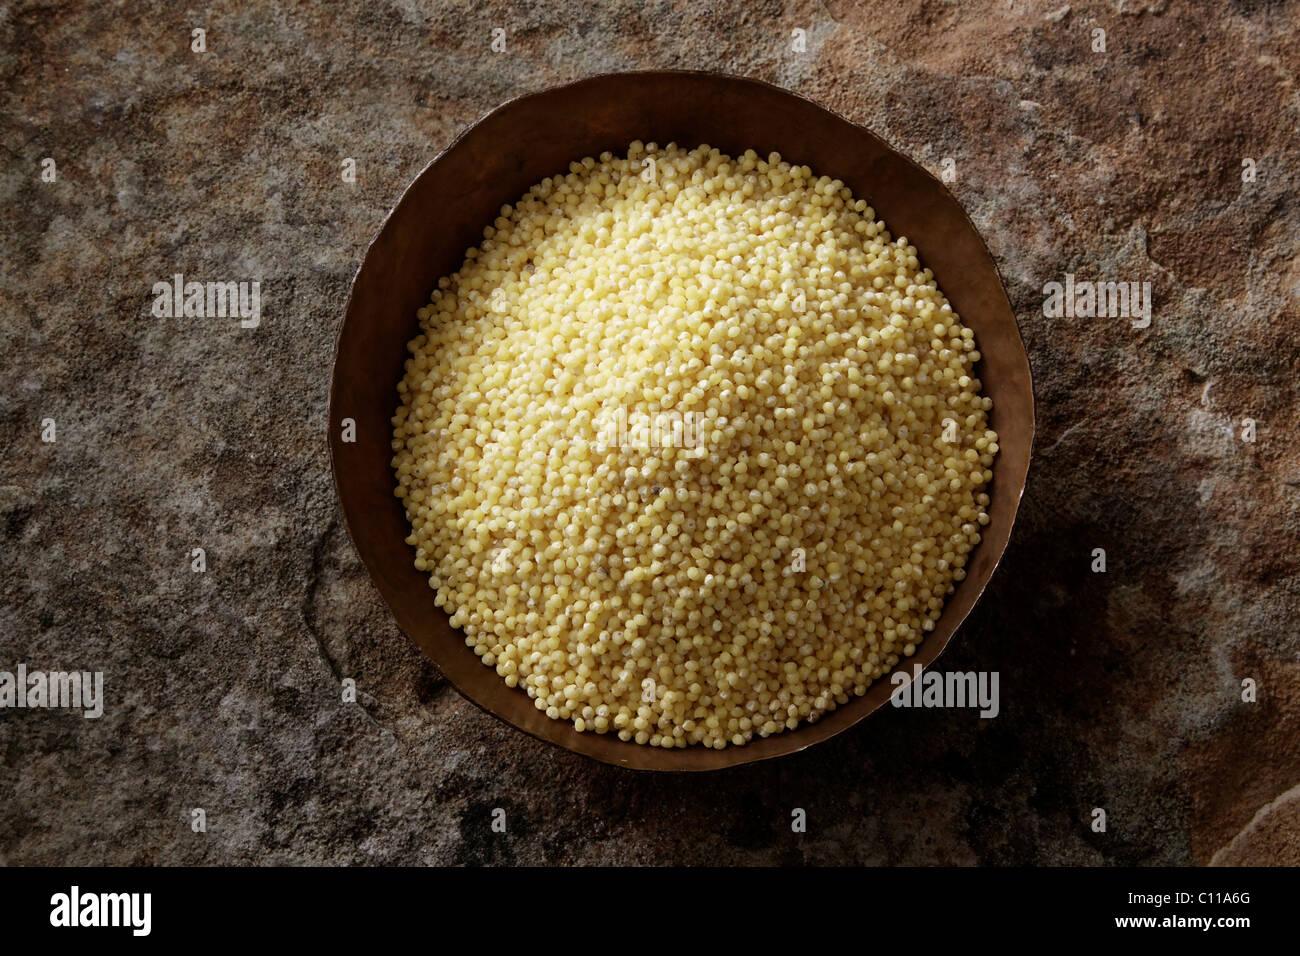 Millet (Panicum miliaceum) in a copper bowl on a stone surface Stock Photo